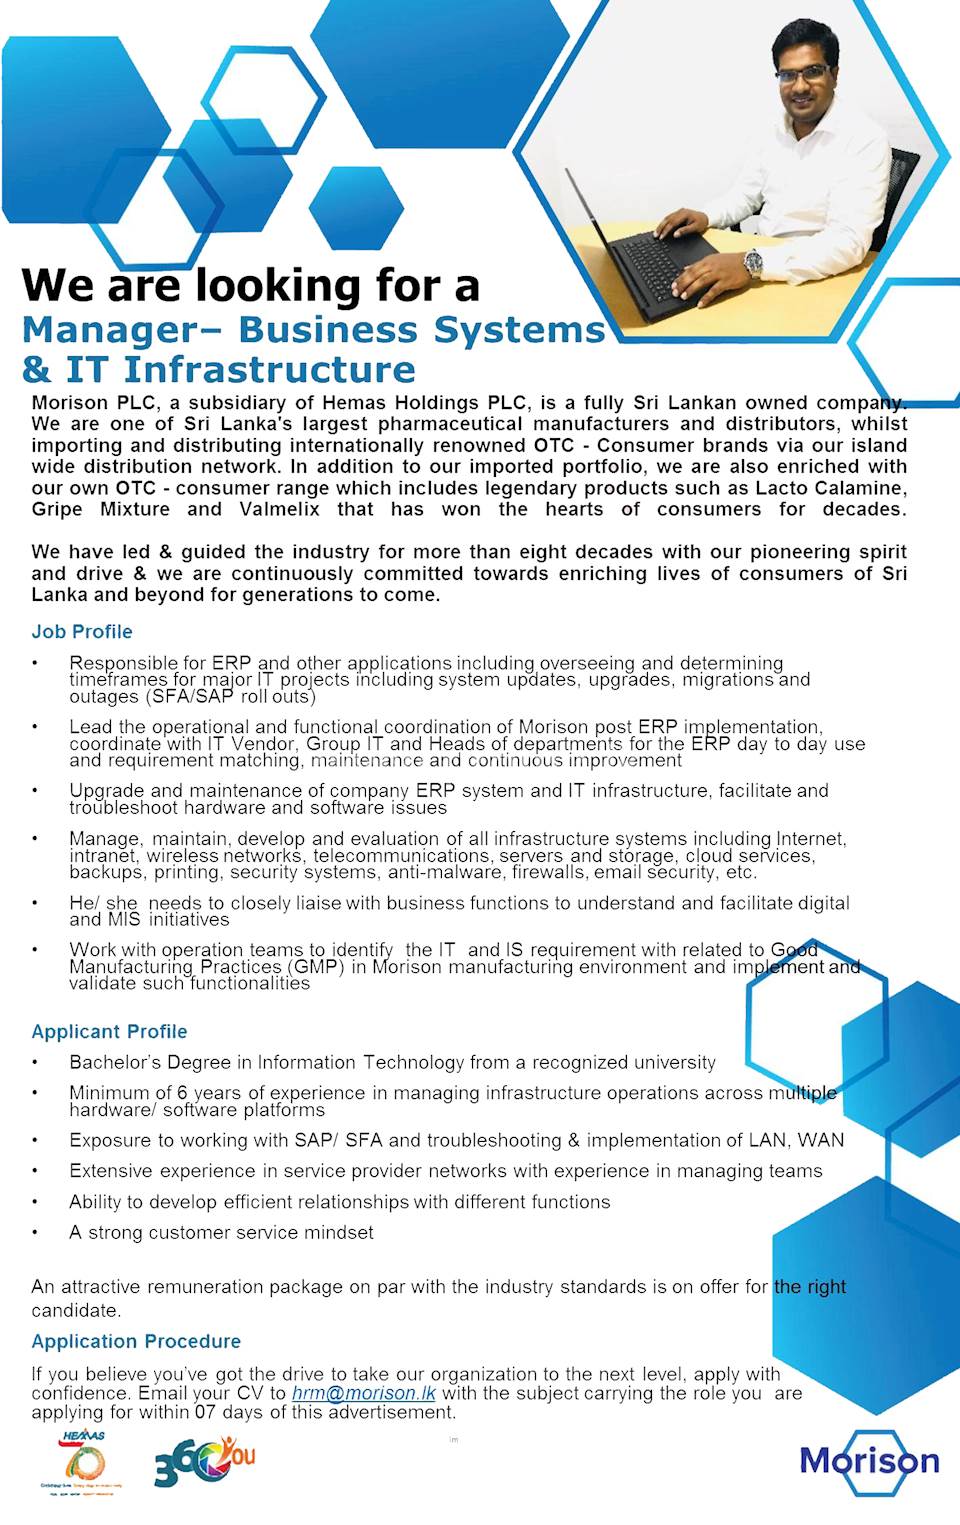 Manager - Business Systems and IT Infrastructure 